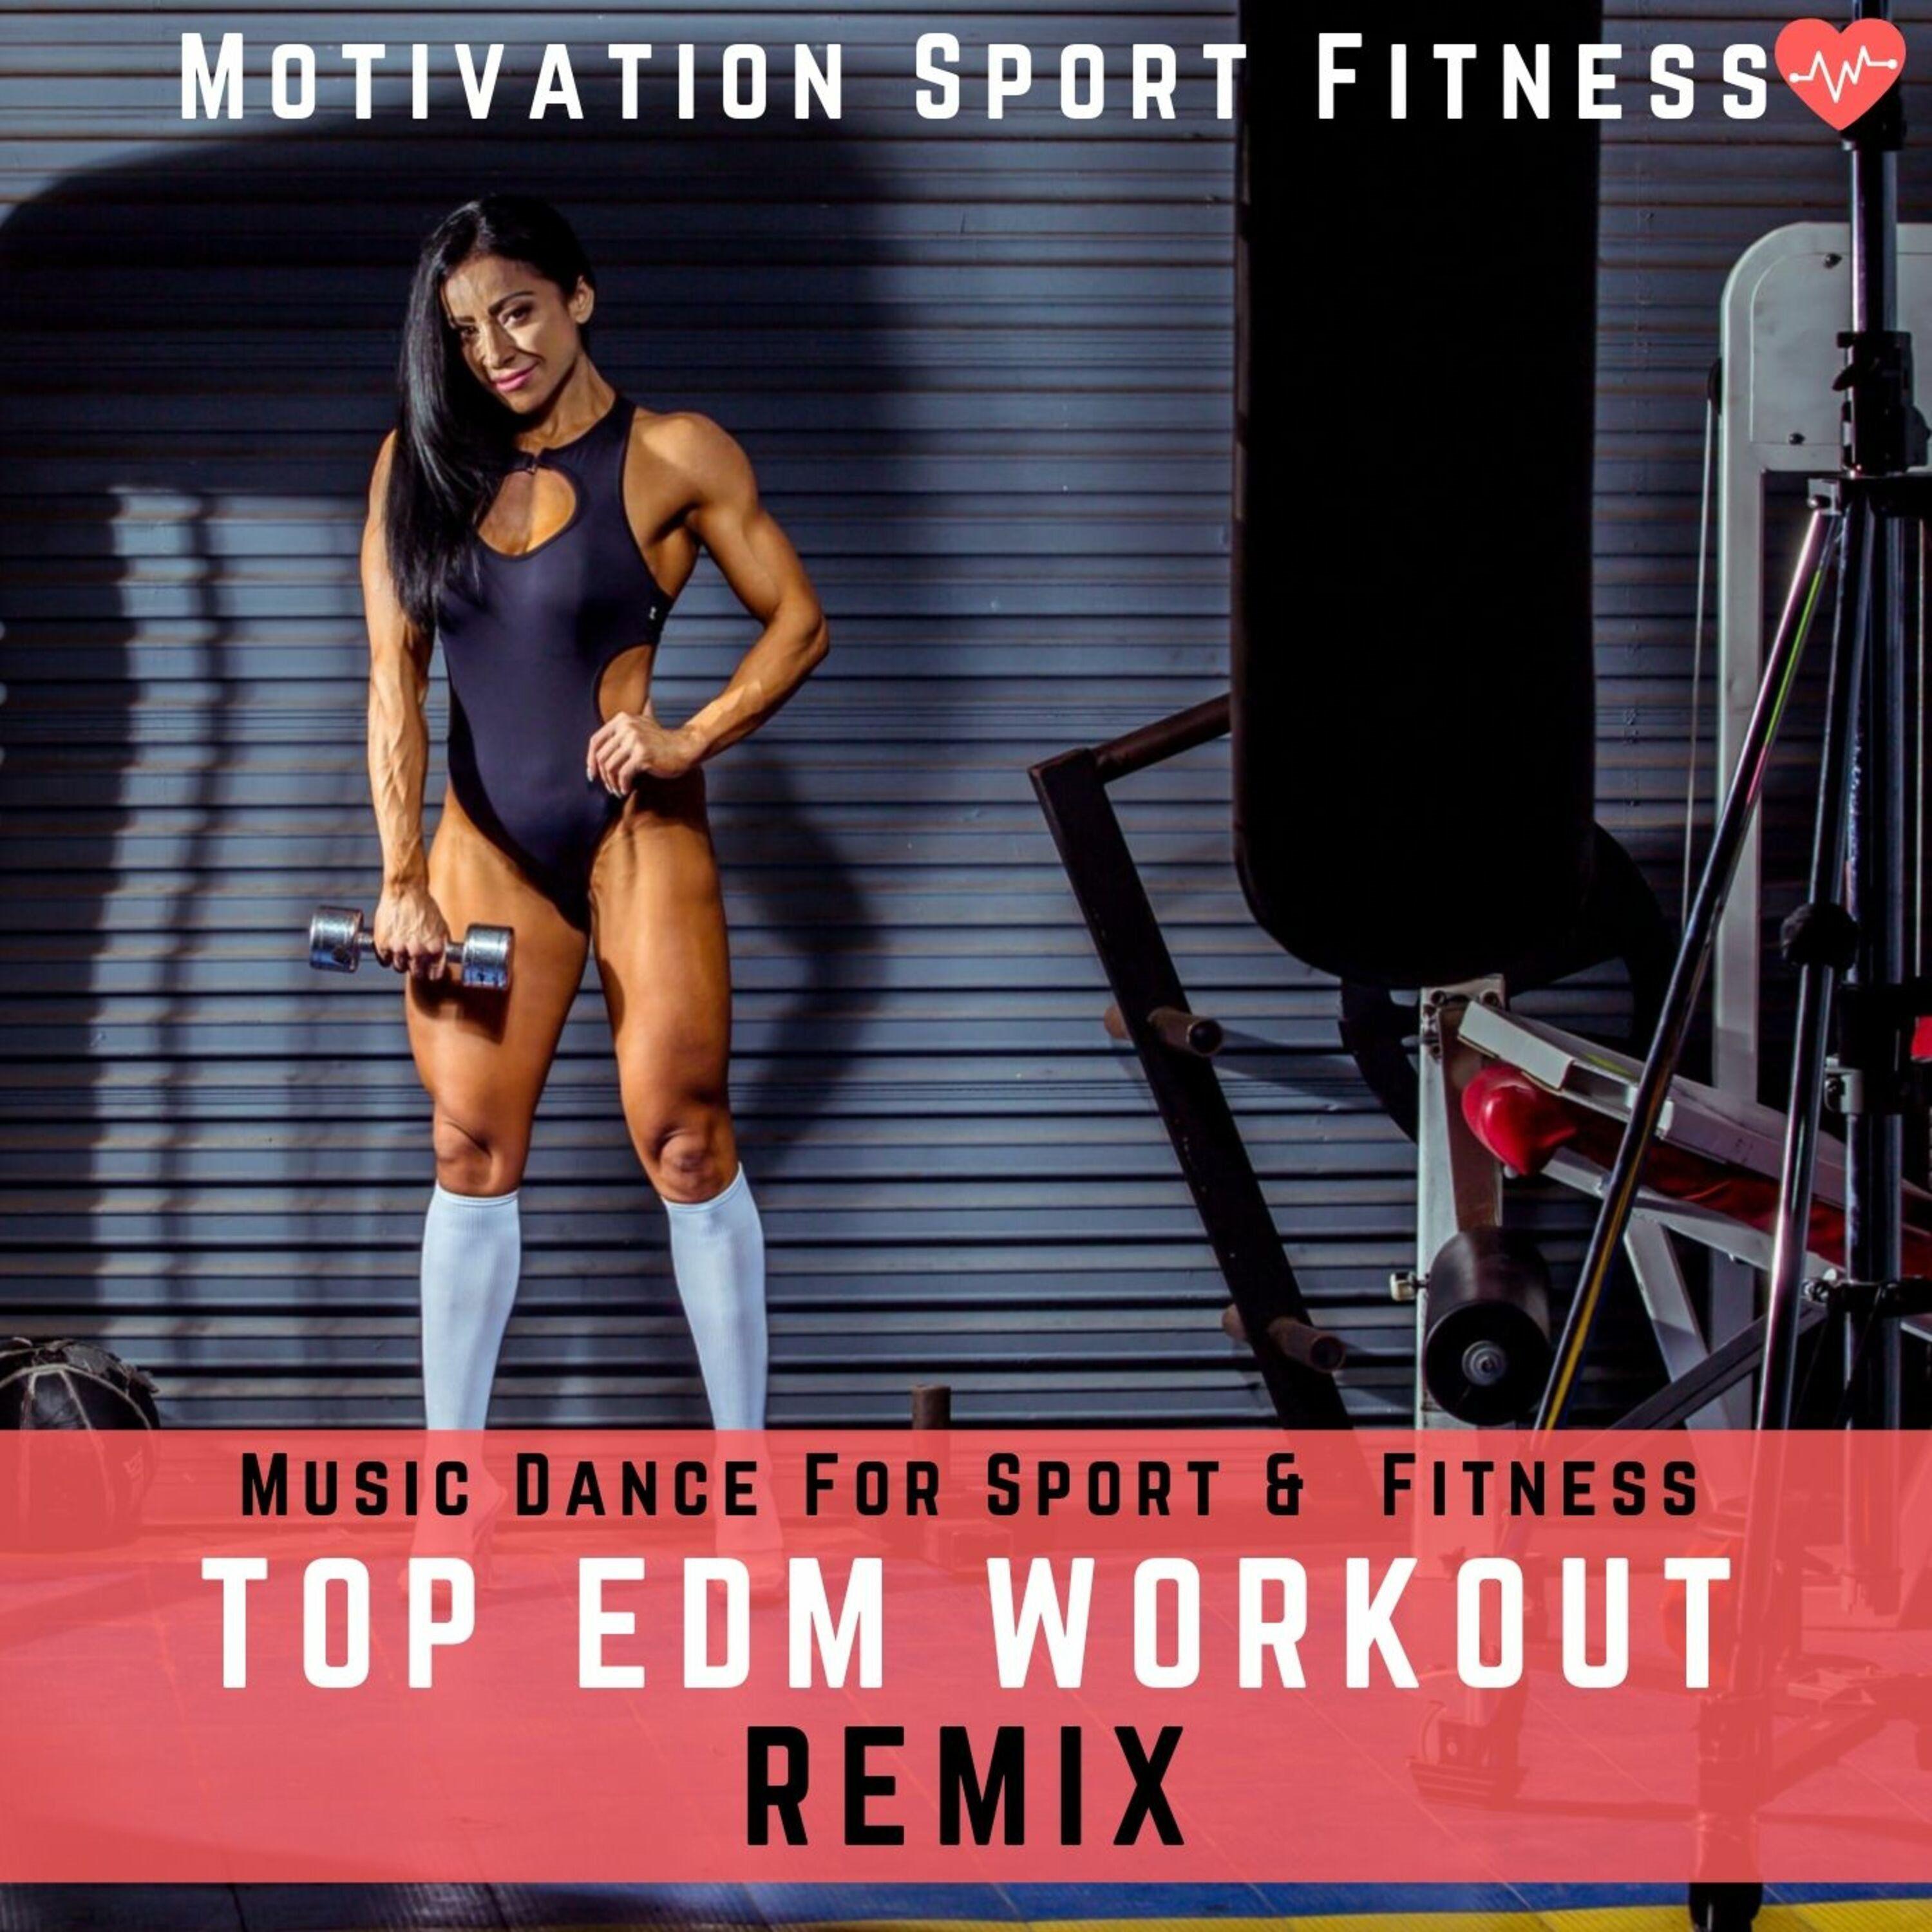 Top EDM Workout Remix (Music Dance for Sport & Fitness)